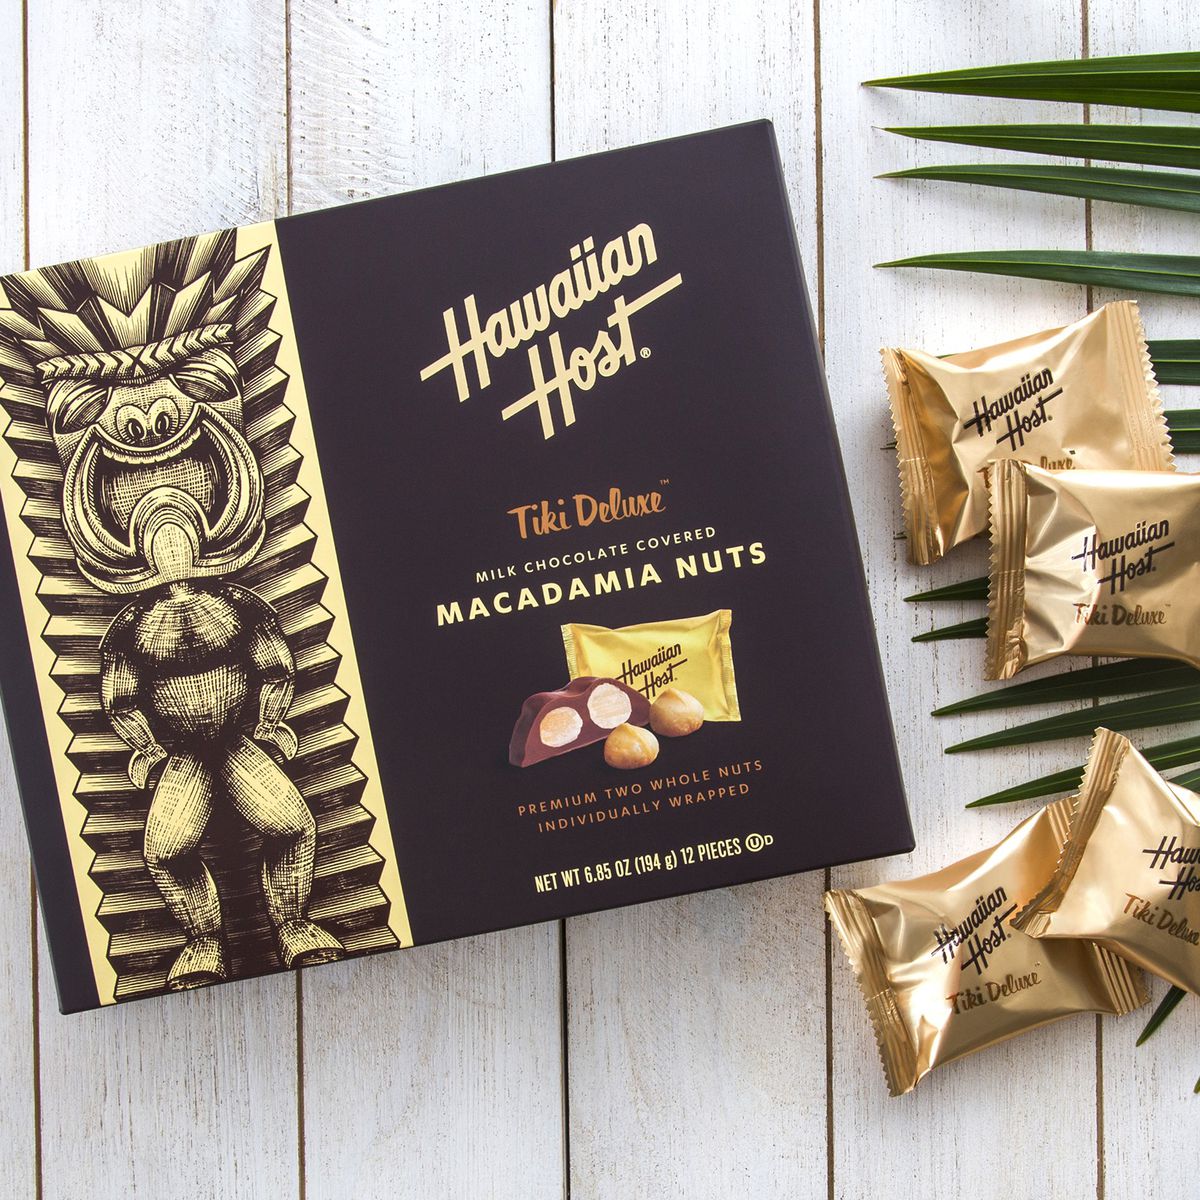 A box of Hawaiian Host Tiki Deluxe Milk Chocolate Macadamia Nuts, sitting on a deck next to a palm leaf and several wrapped candies.